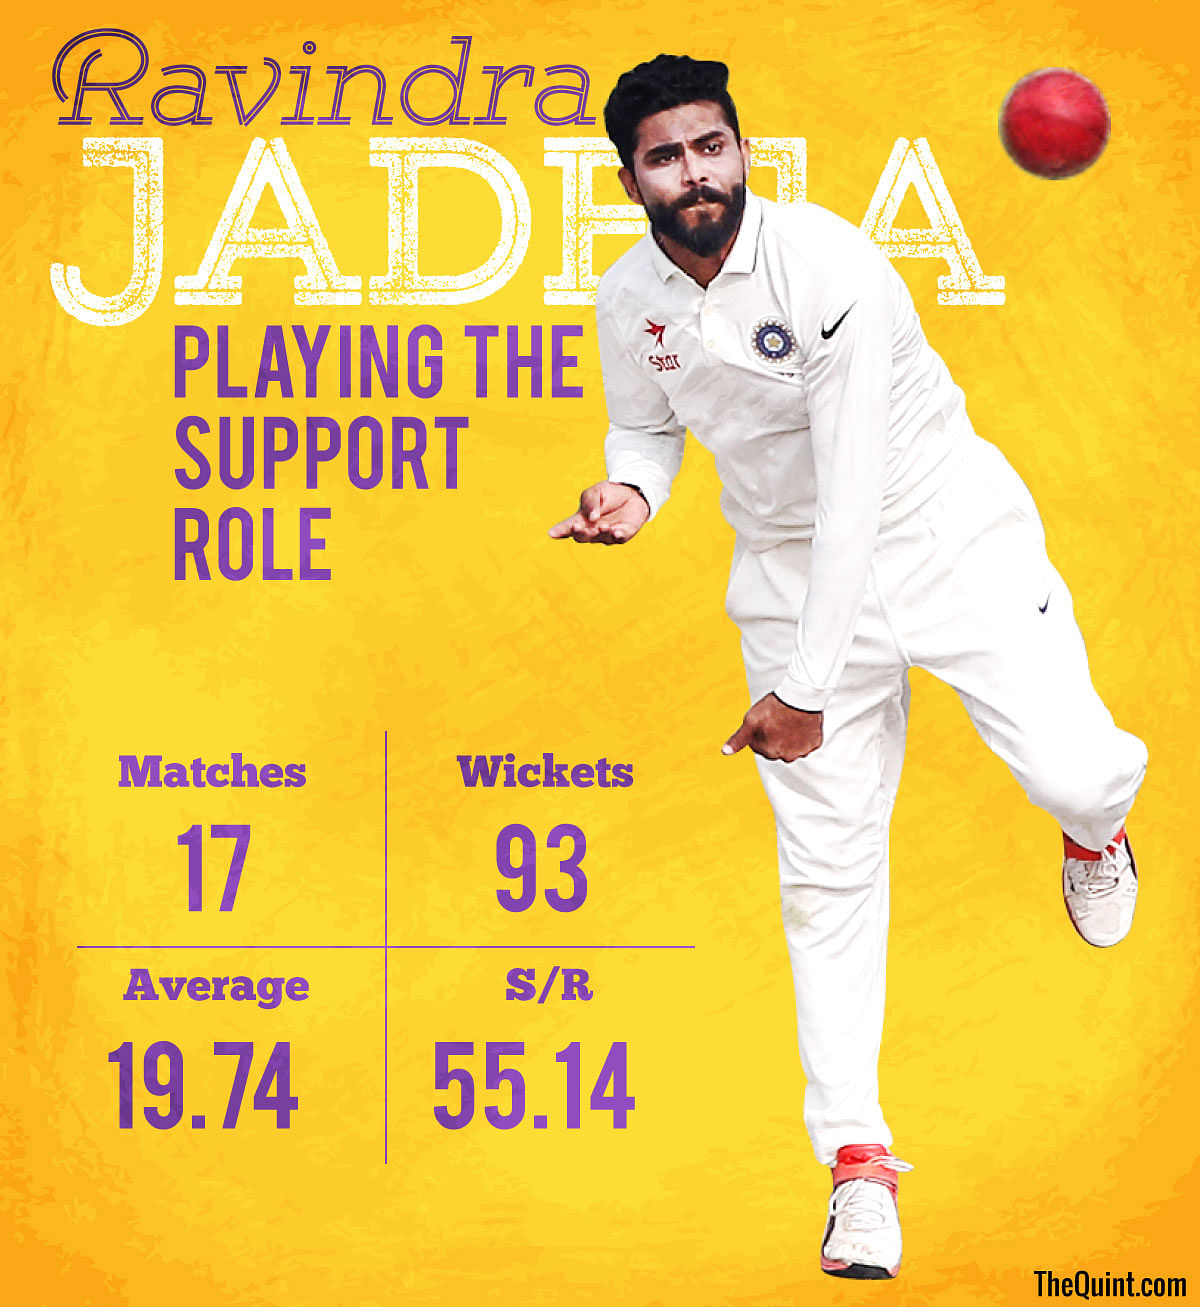 From ‘the flashy limited-overs cricketer’ to India’s Test bowling mainstay, tracing Ravindra Jadeja’s journey.